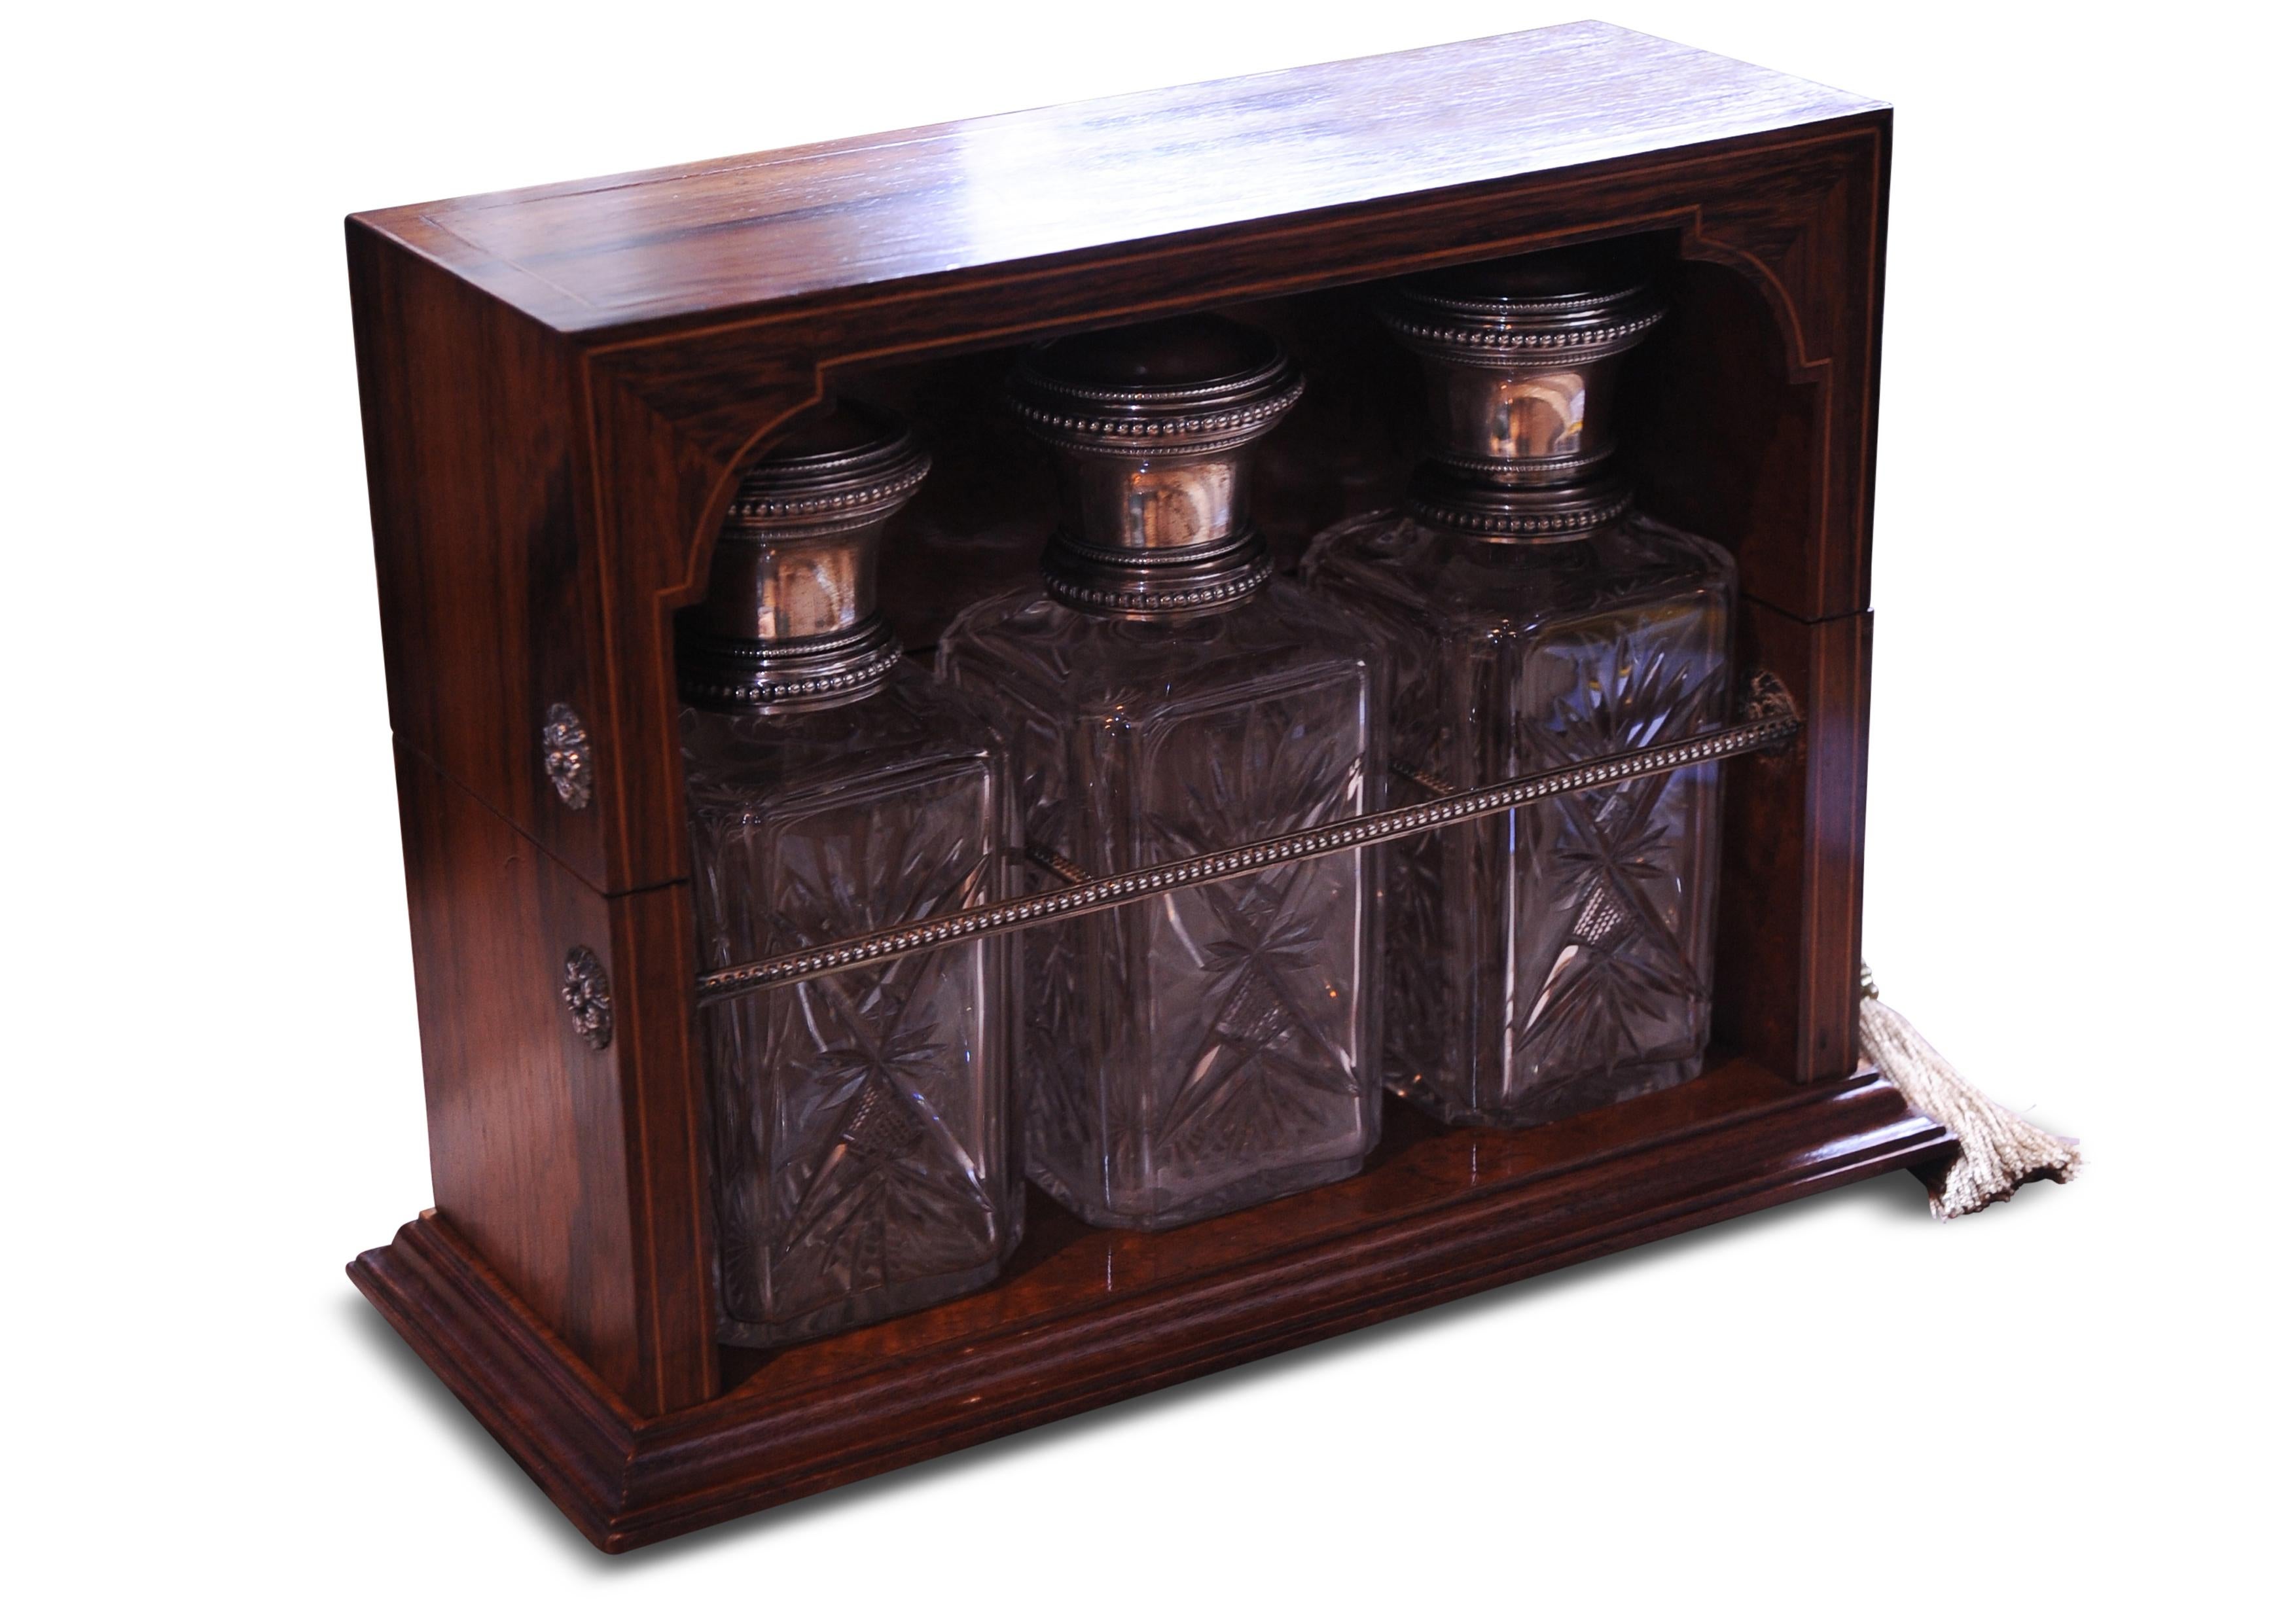 Regency 19th Century Silver Cut Glass Decanters Housed in a Rosewood & Amboyna Tantalus